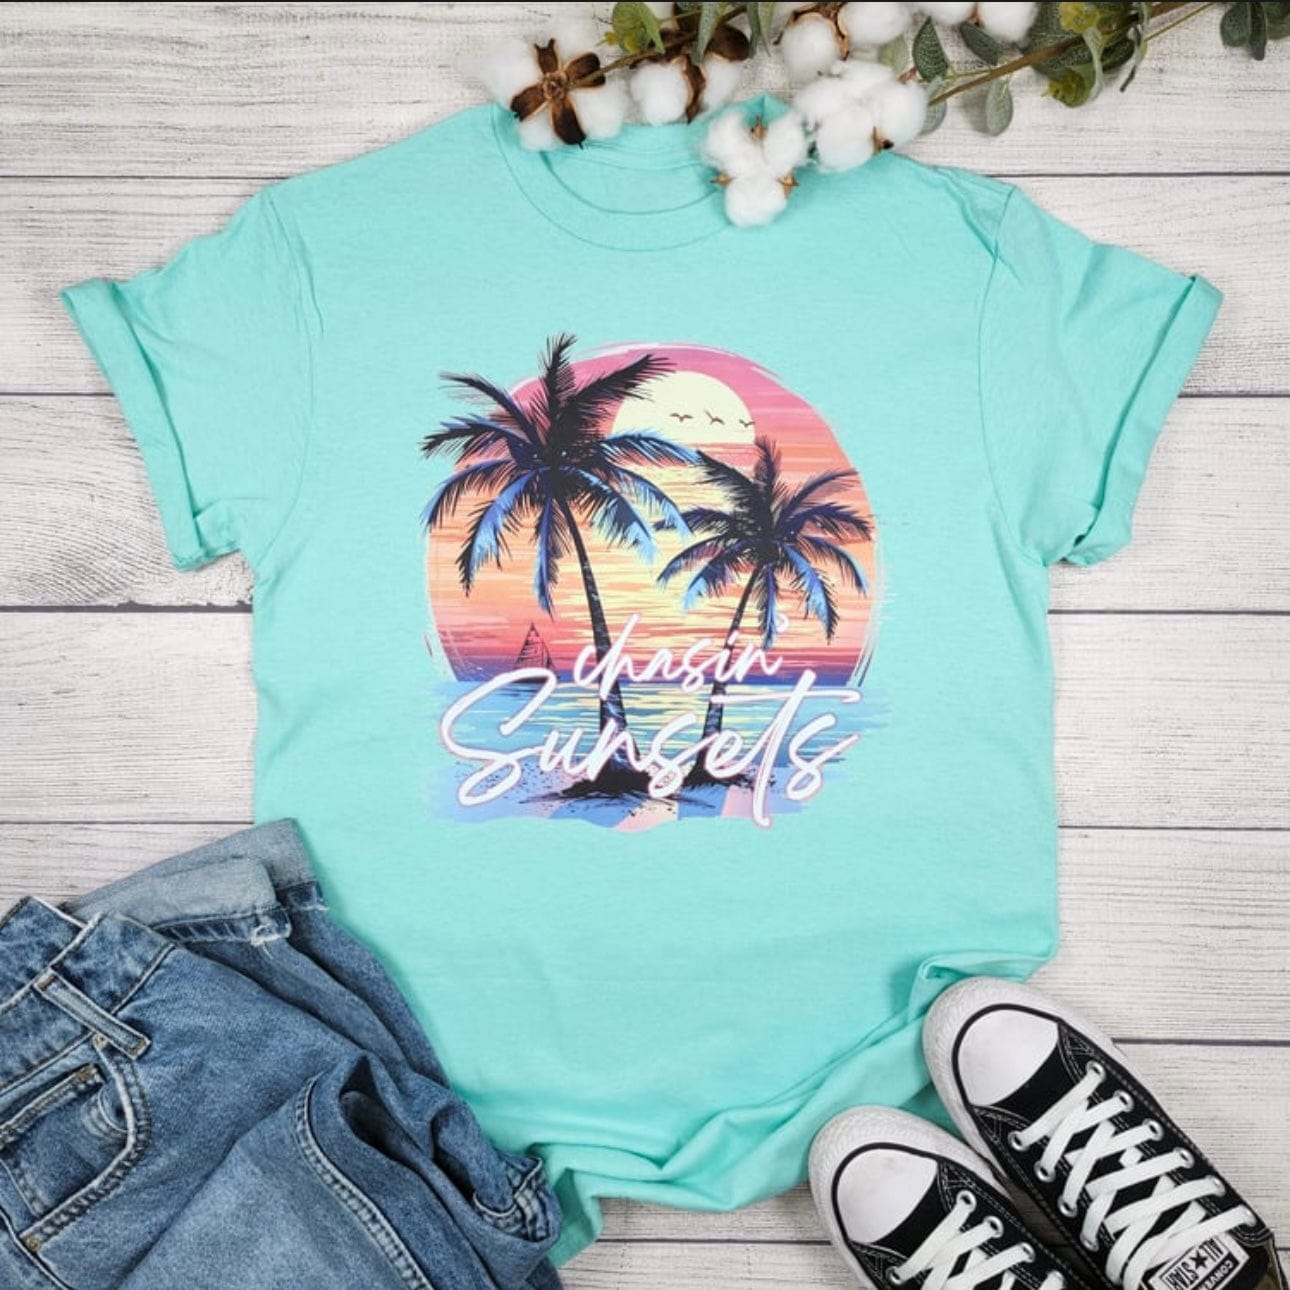 Envy Stylz Boutique Women - Apparel - Shirts - T-Shirts Chasin Sunsets Graphic Tee